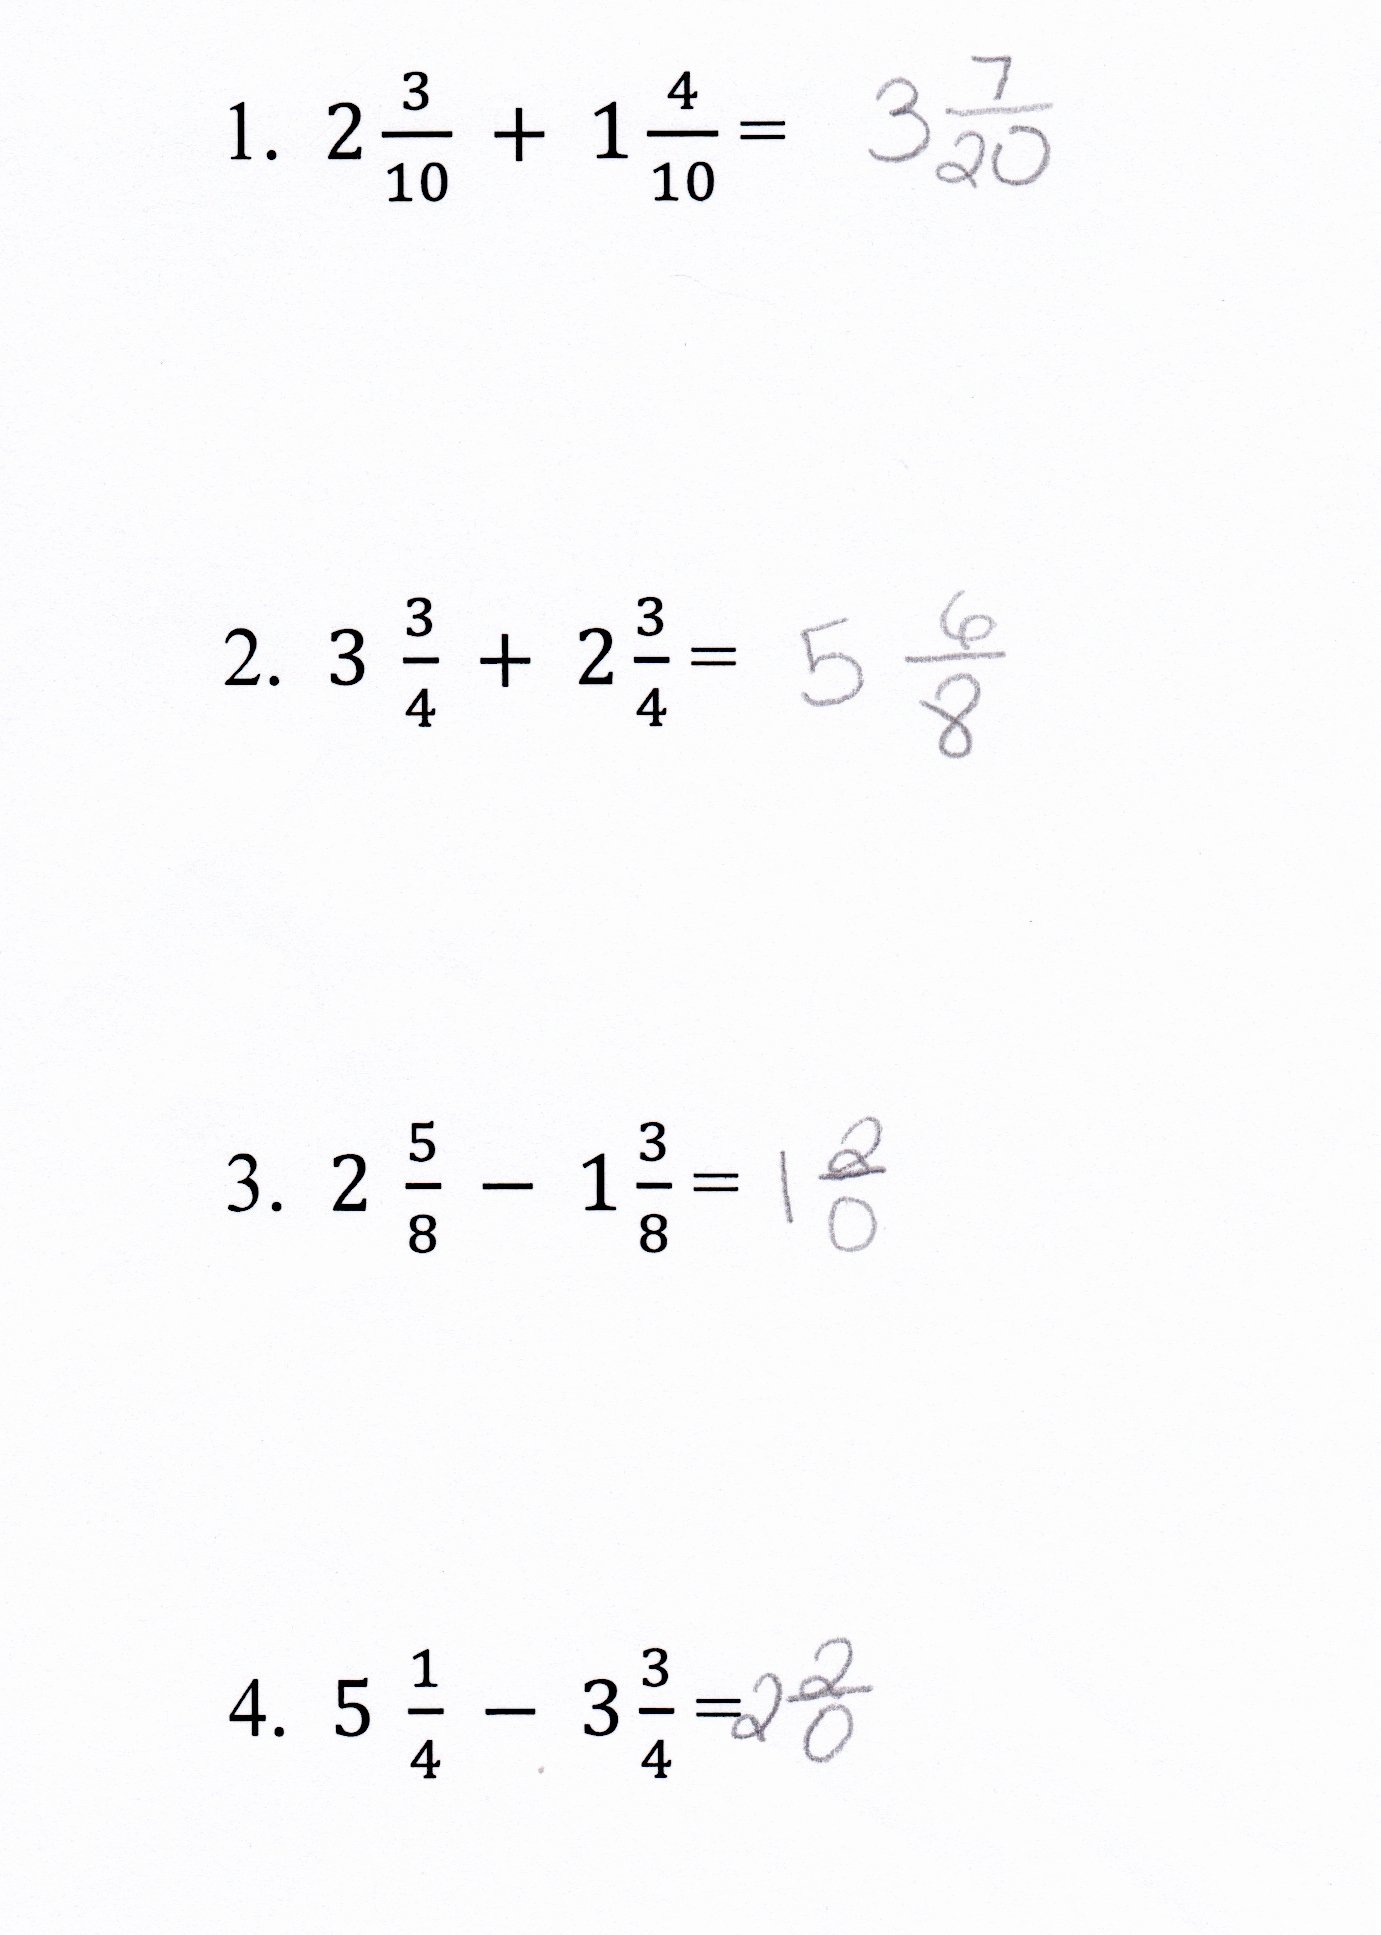 Subtracting Mixed Numbers Worksheet New Worksheet Adding and Subtracting Fractions and Mixed